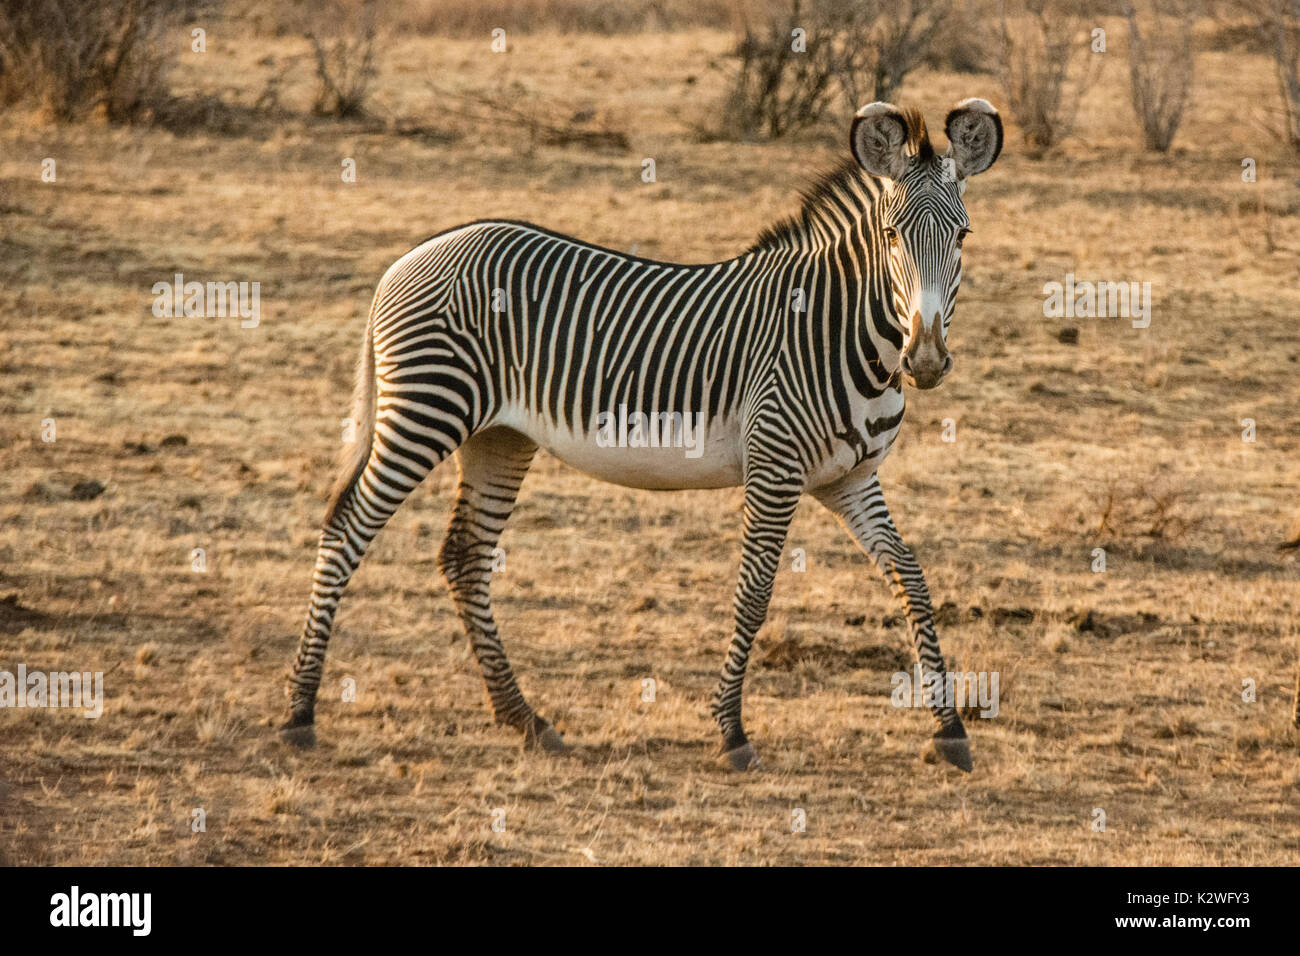 Side view of a solitary wild Grevy's Zebra, Equus grevyi, looking at camera, Buffalo Springs National Reserve, Isiolo County, Kenya, East Africa Stock Photo